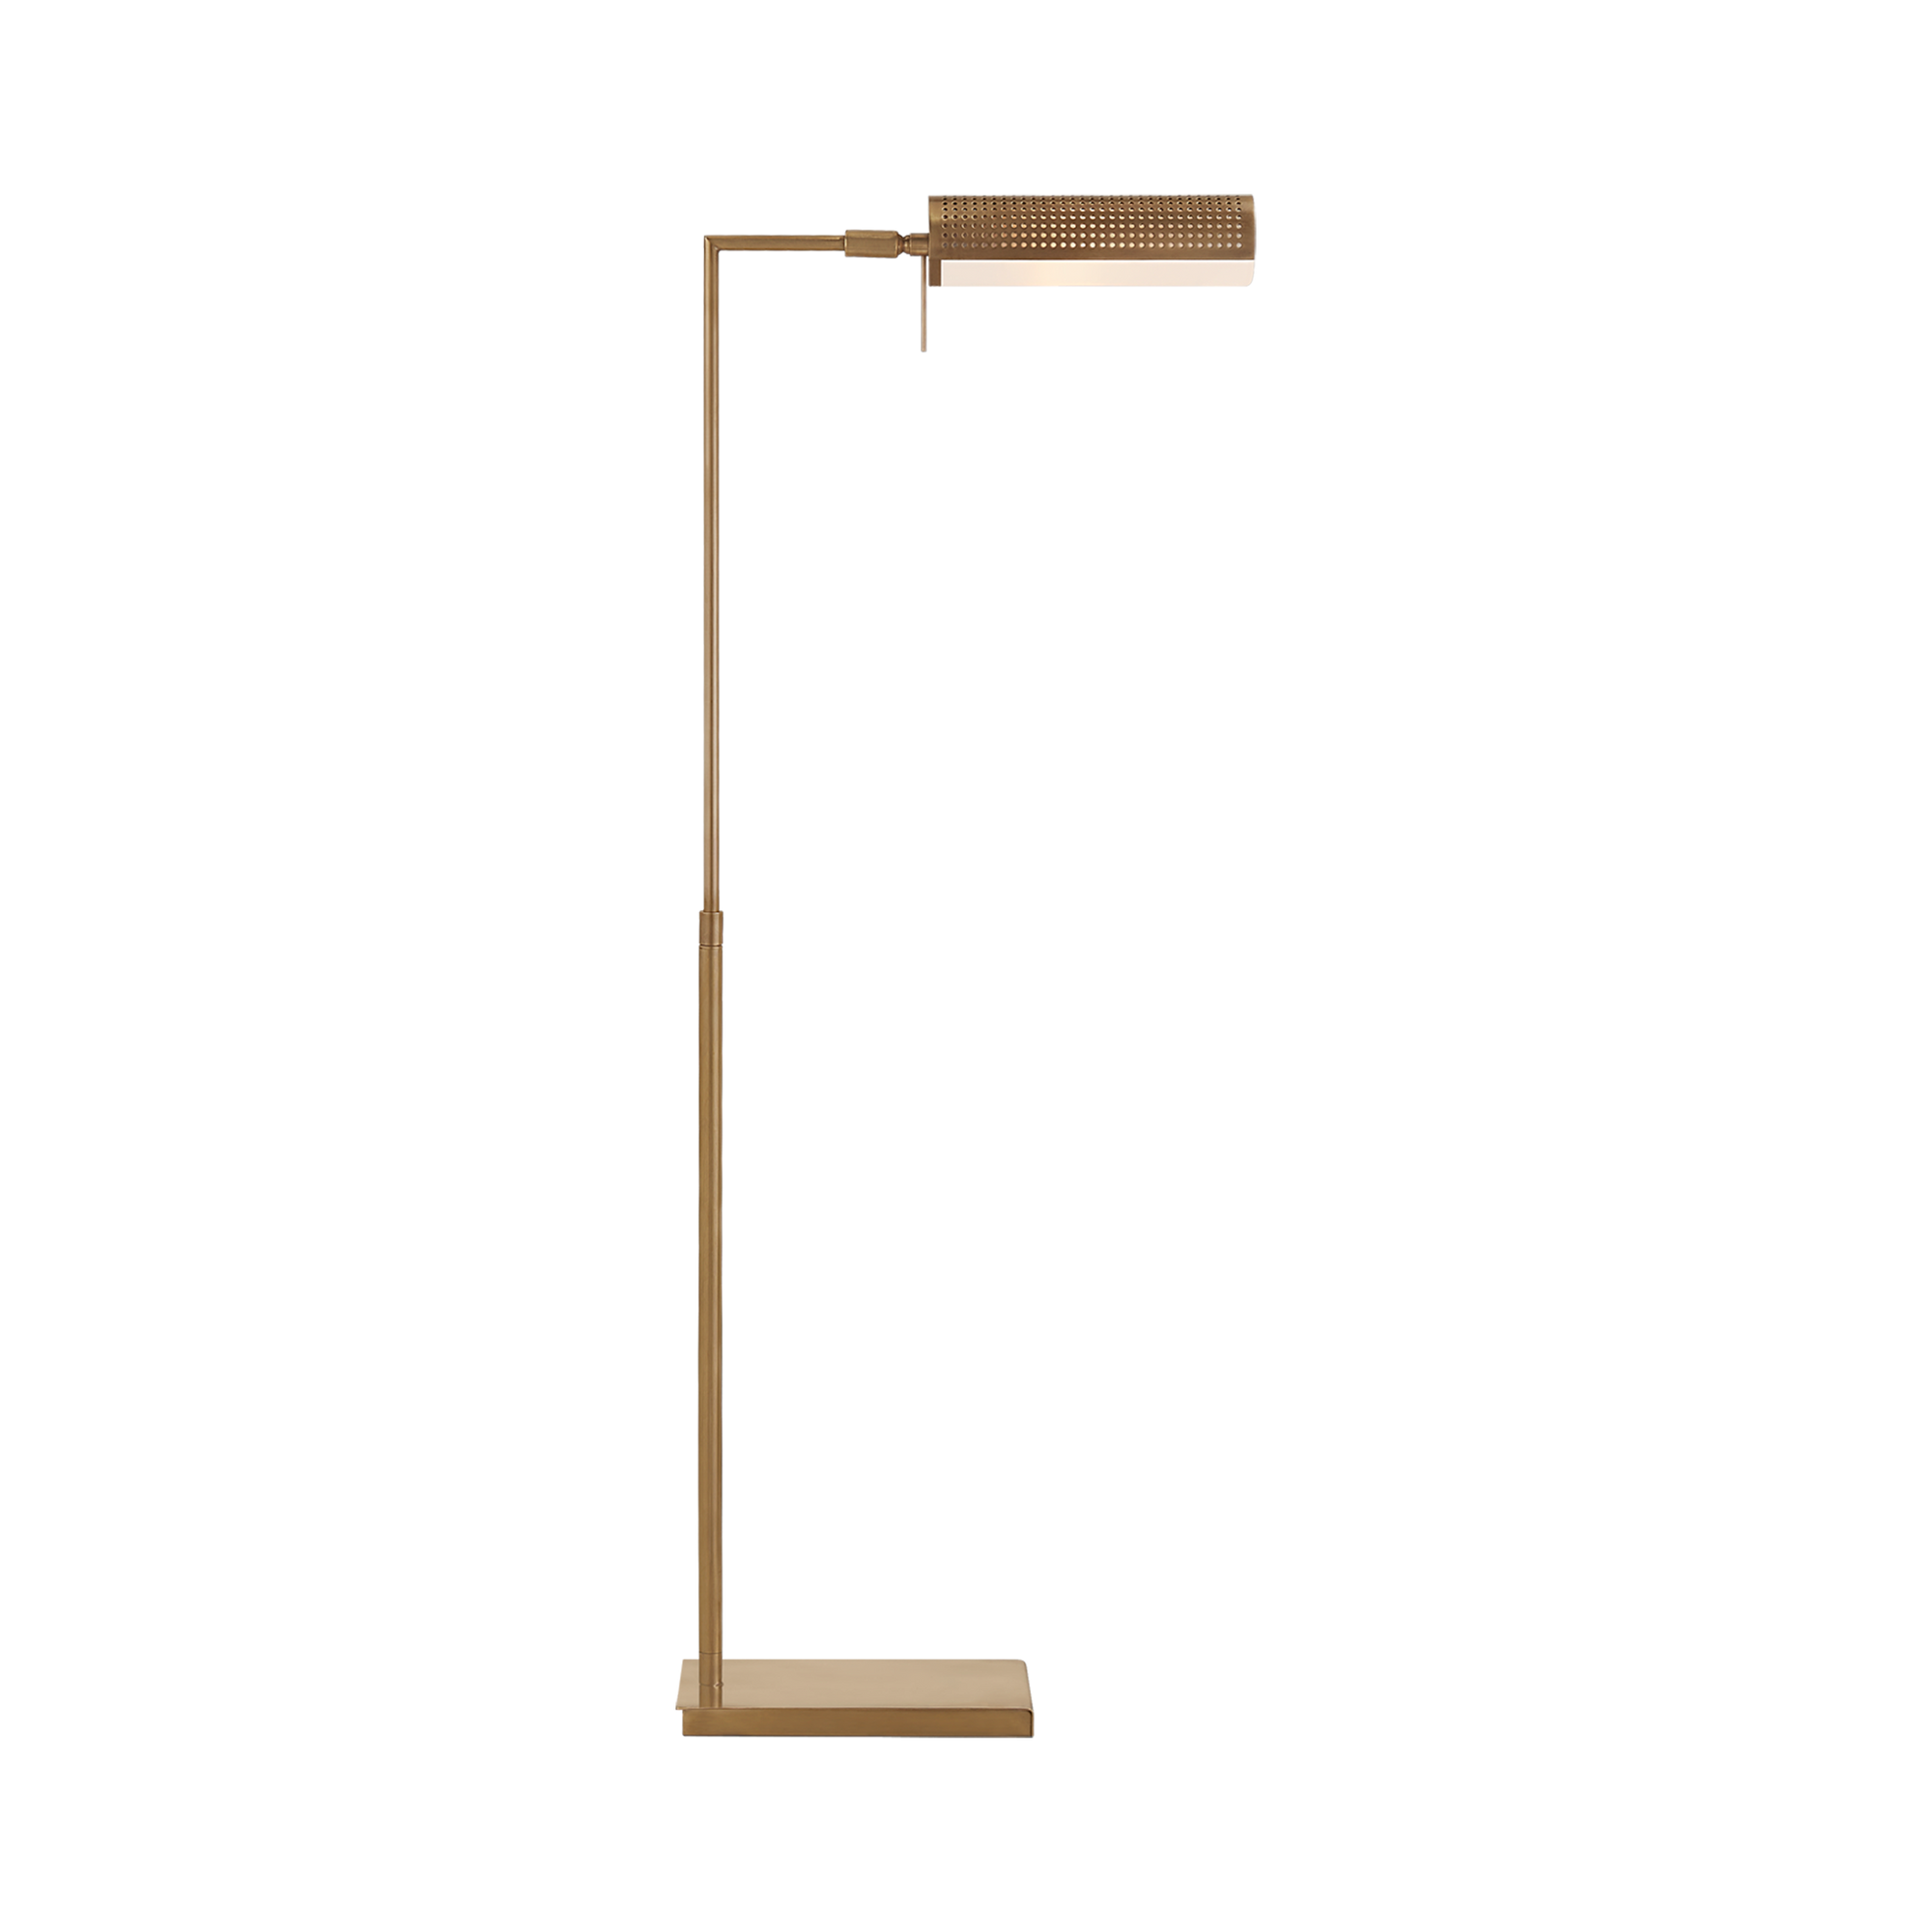 The Precision Pharmacy Floor Light features a distinctive design and soulful vibe.